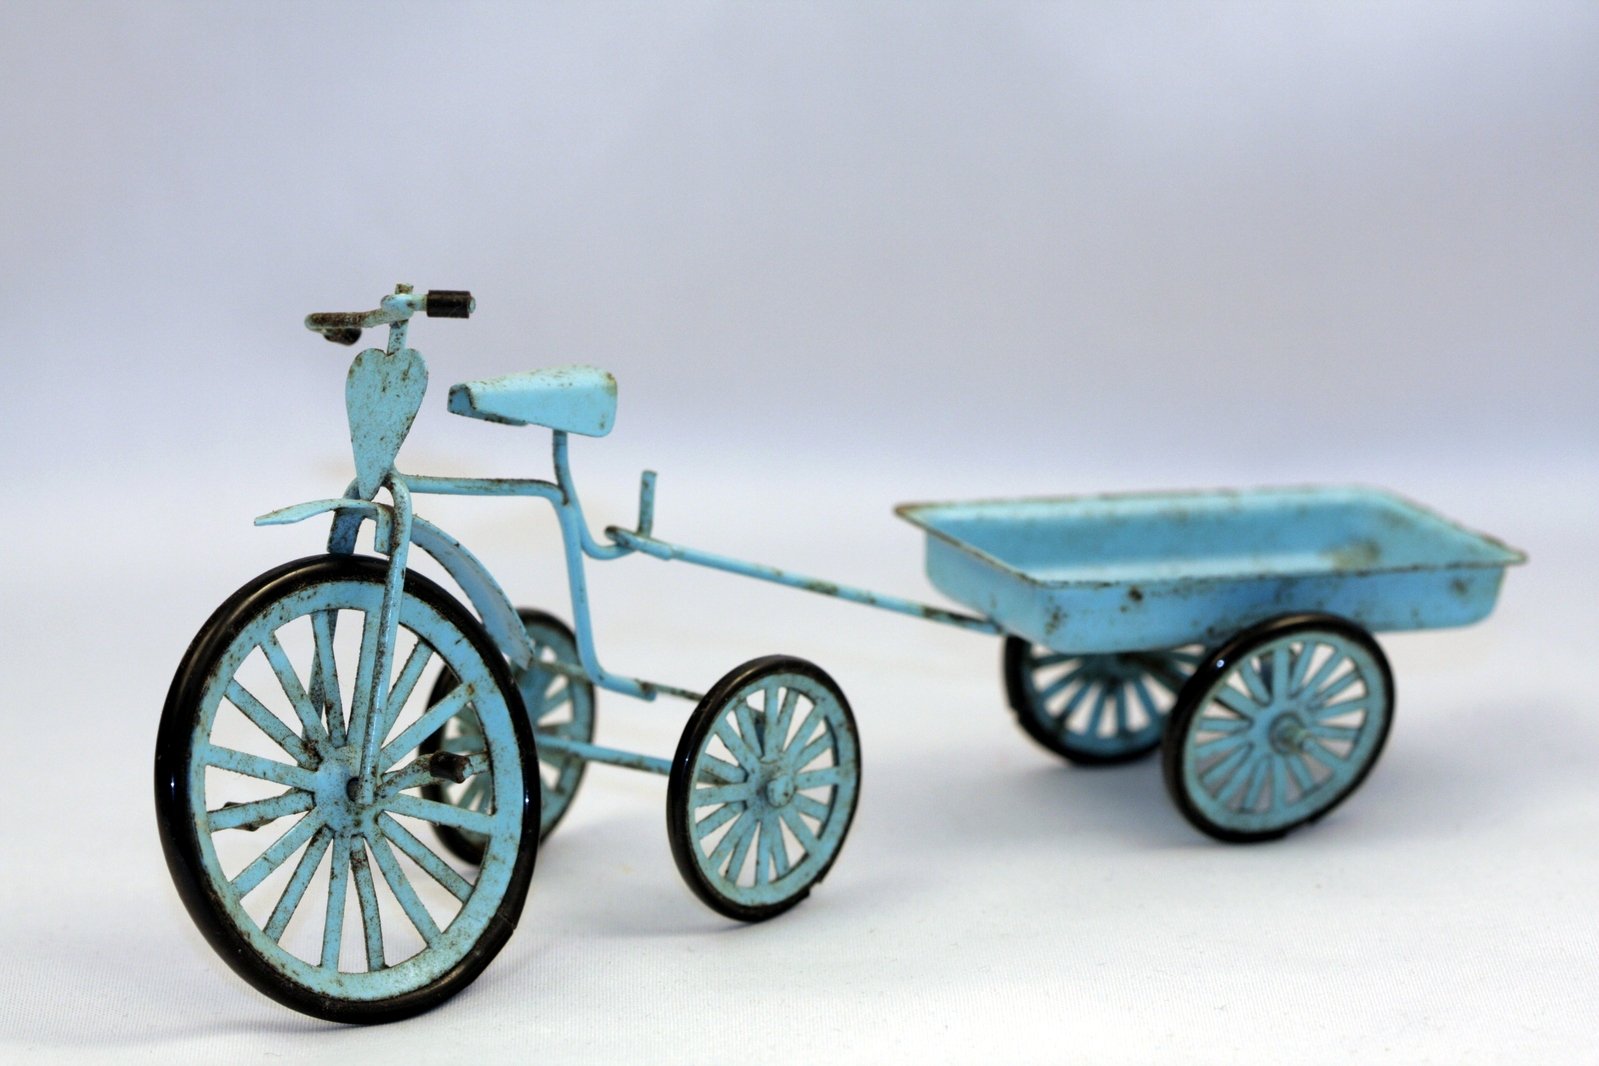 this is an image of a miniature model of a bicycle and wagon